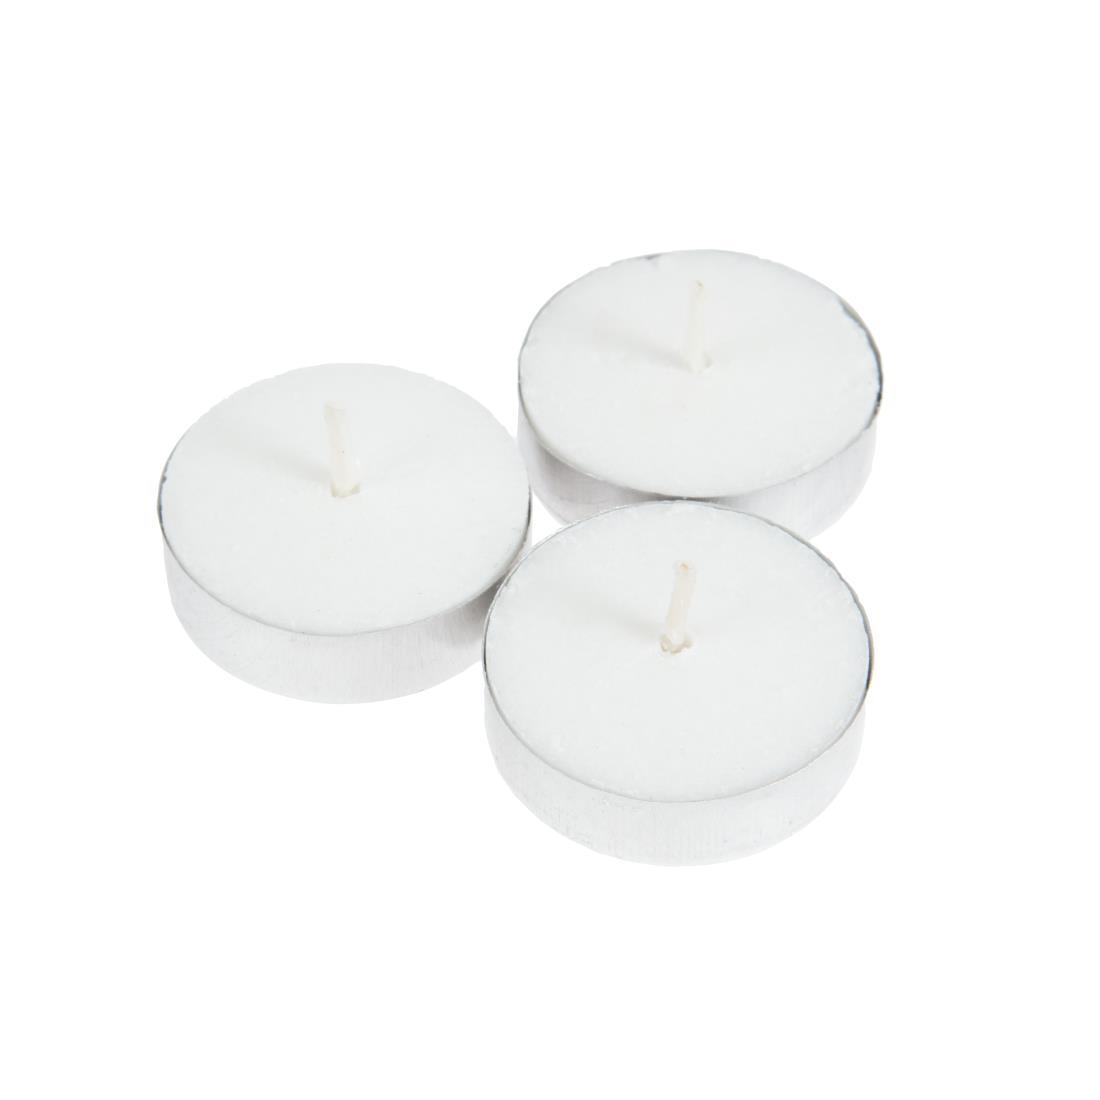 Olympia 4 Hour Tealights (Pack of 100) - GF448  - 4